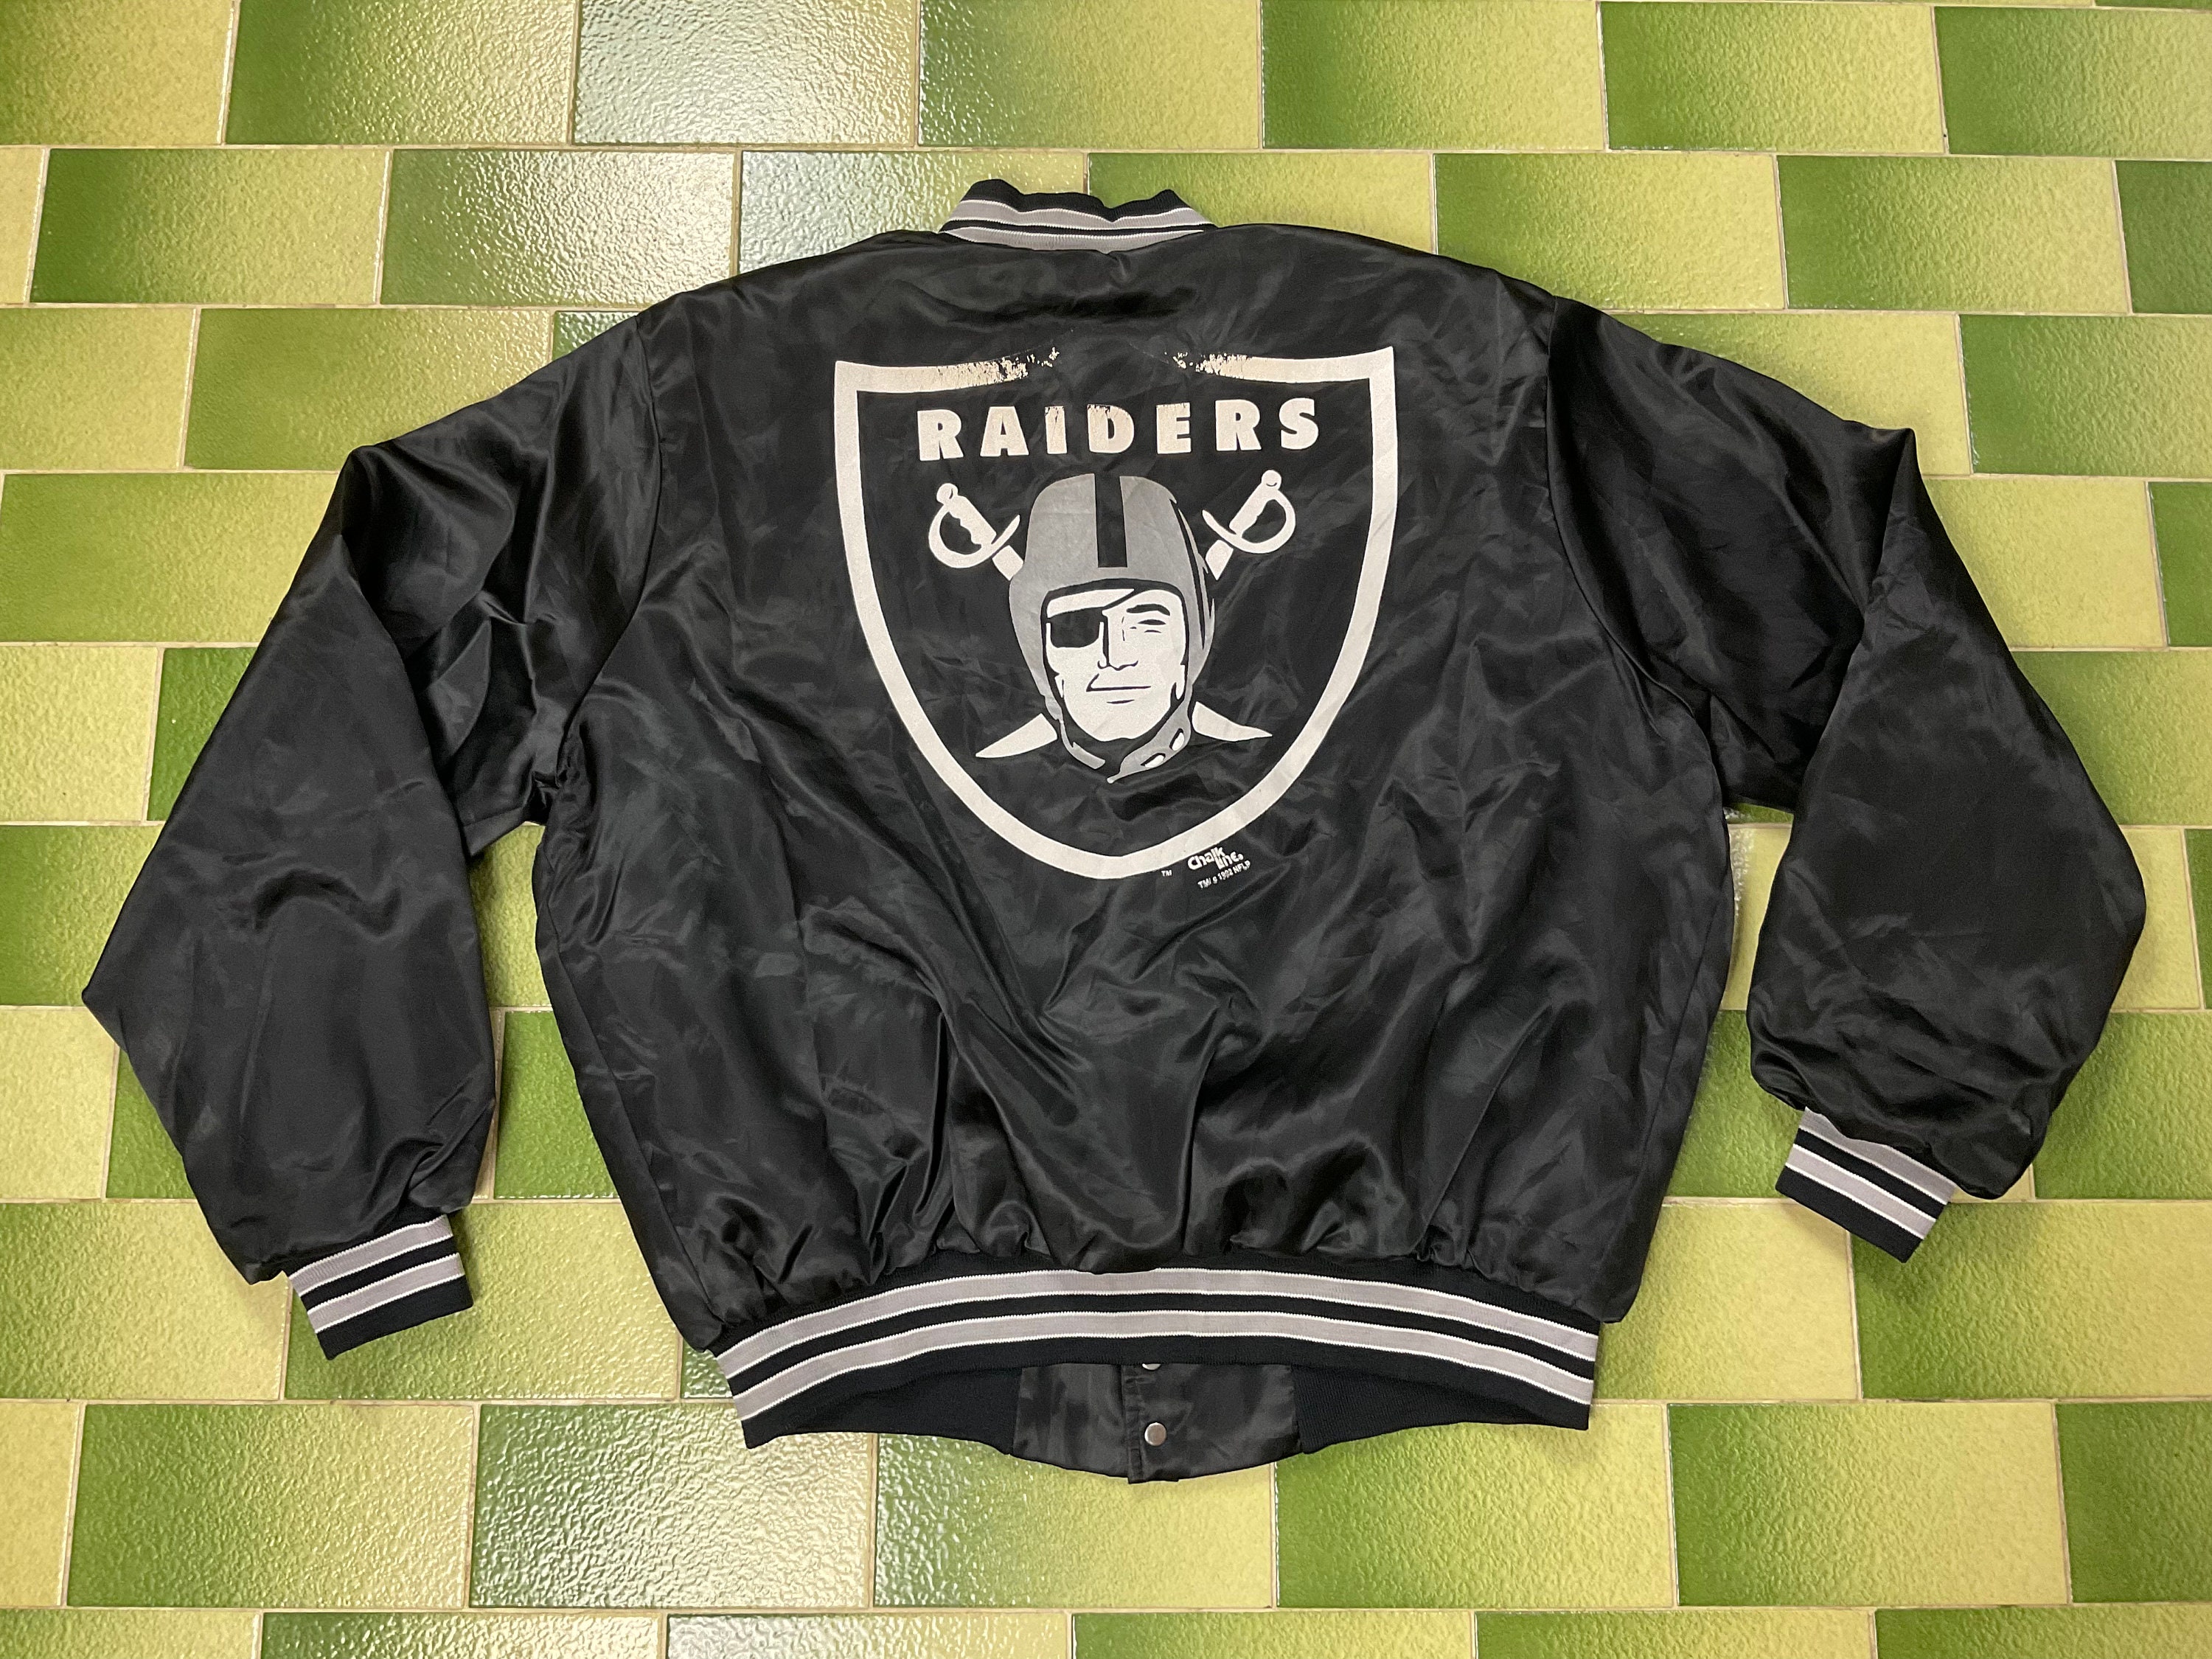 Vintage 90s 1992 NFL Los Angeles Raiders Satin Bomber Jacket by Chalk Line  Fits Size L Adult Made in USA